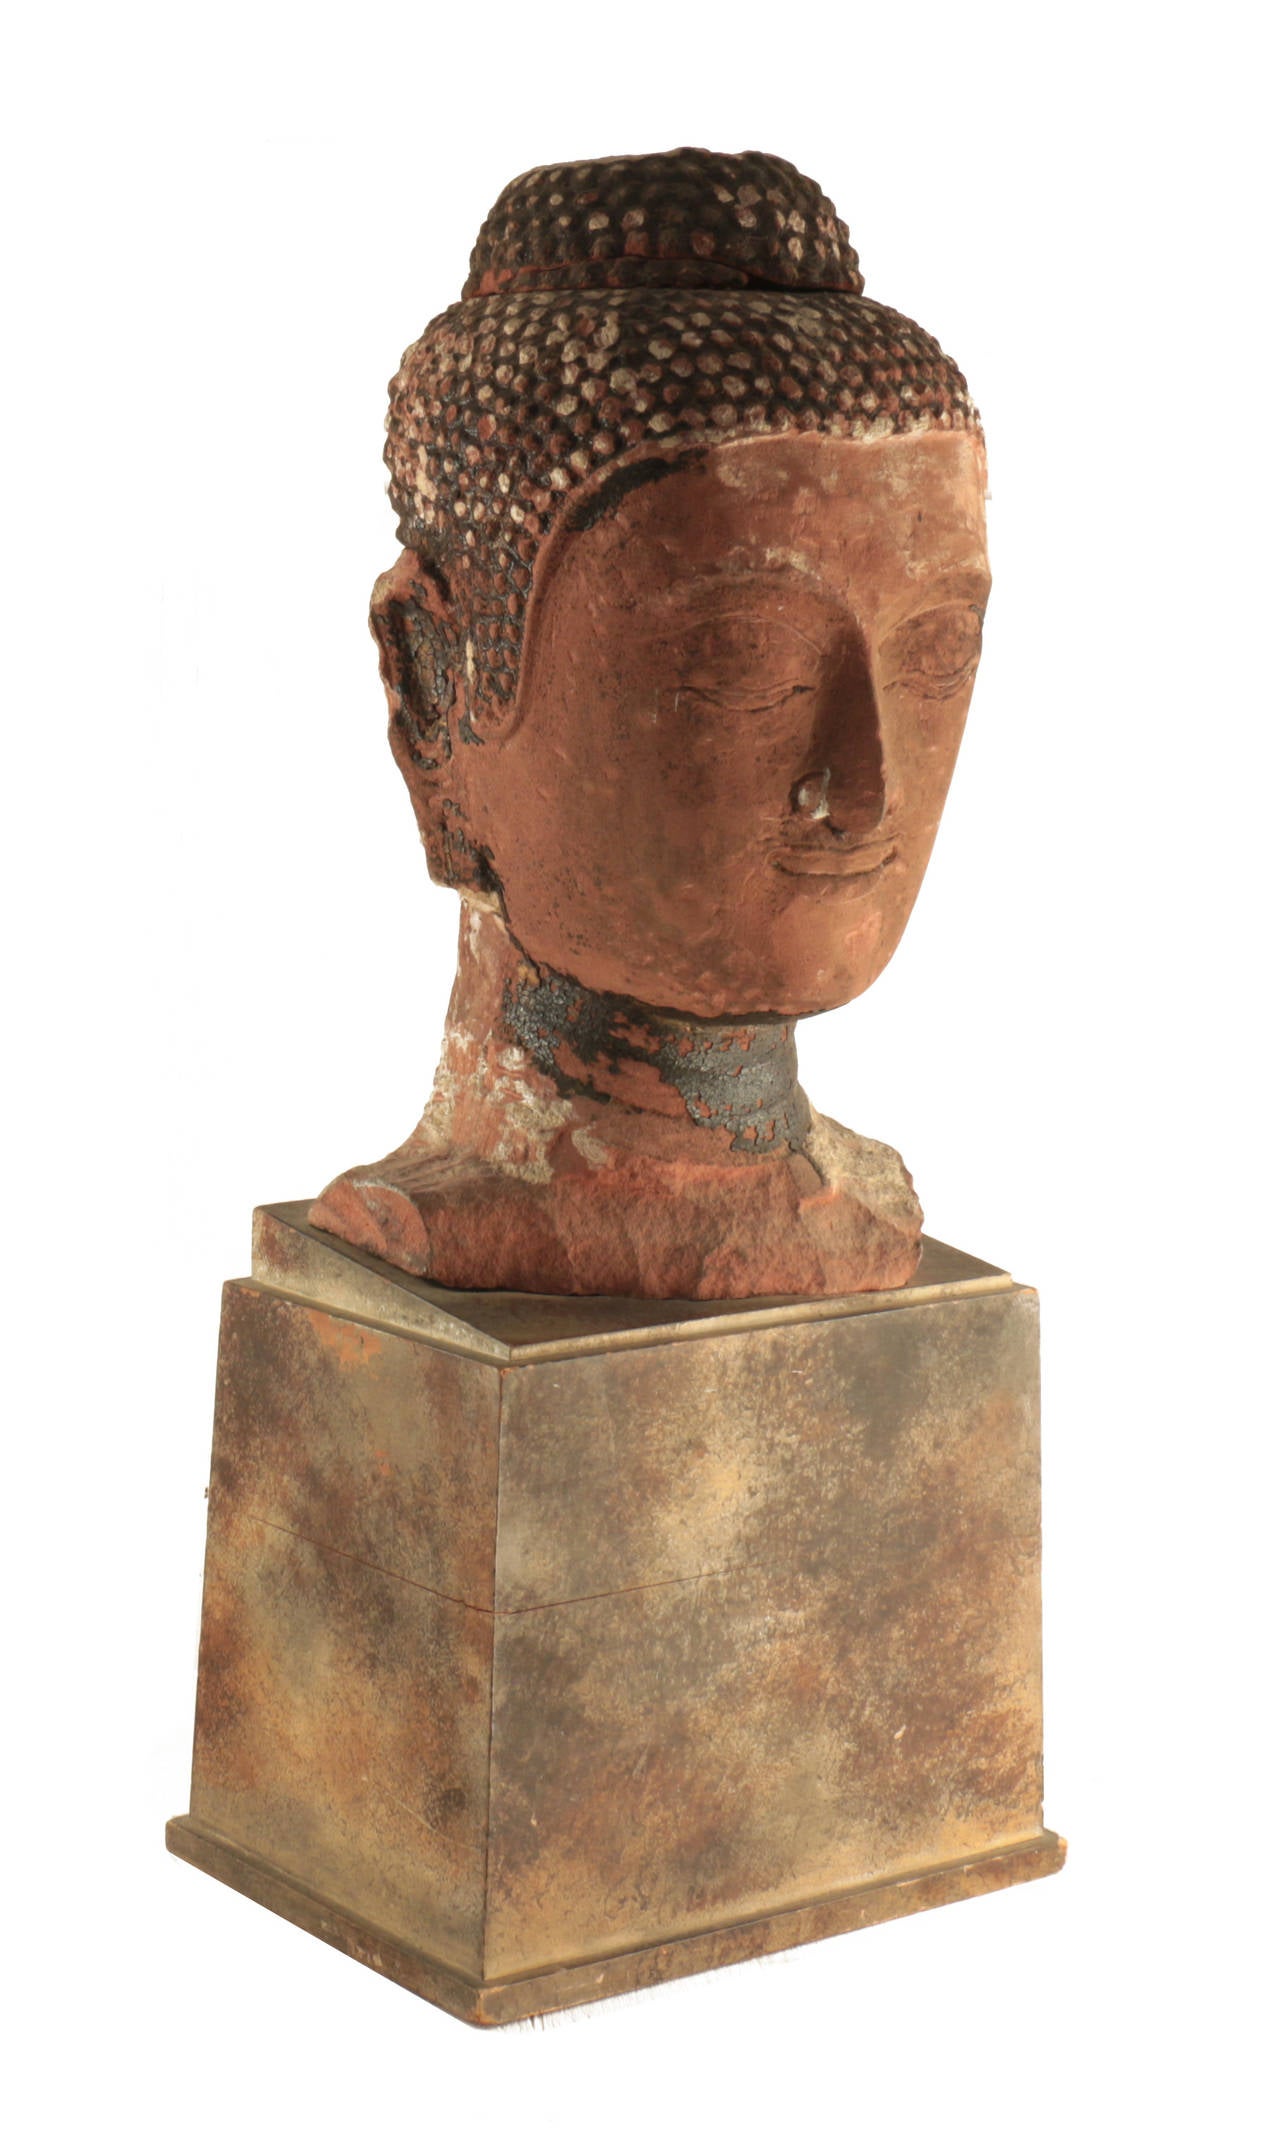 Stone Buddha head, 16th century Ayutthaya, Thailand. Red sandstone. Classic form with blissful expression, undulating eye-lids, and heart-shaped hairline with tight curls.